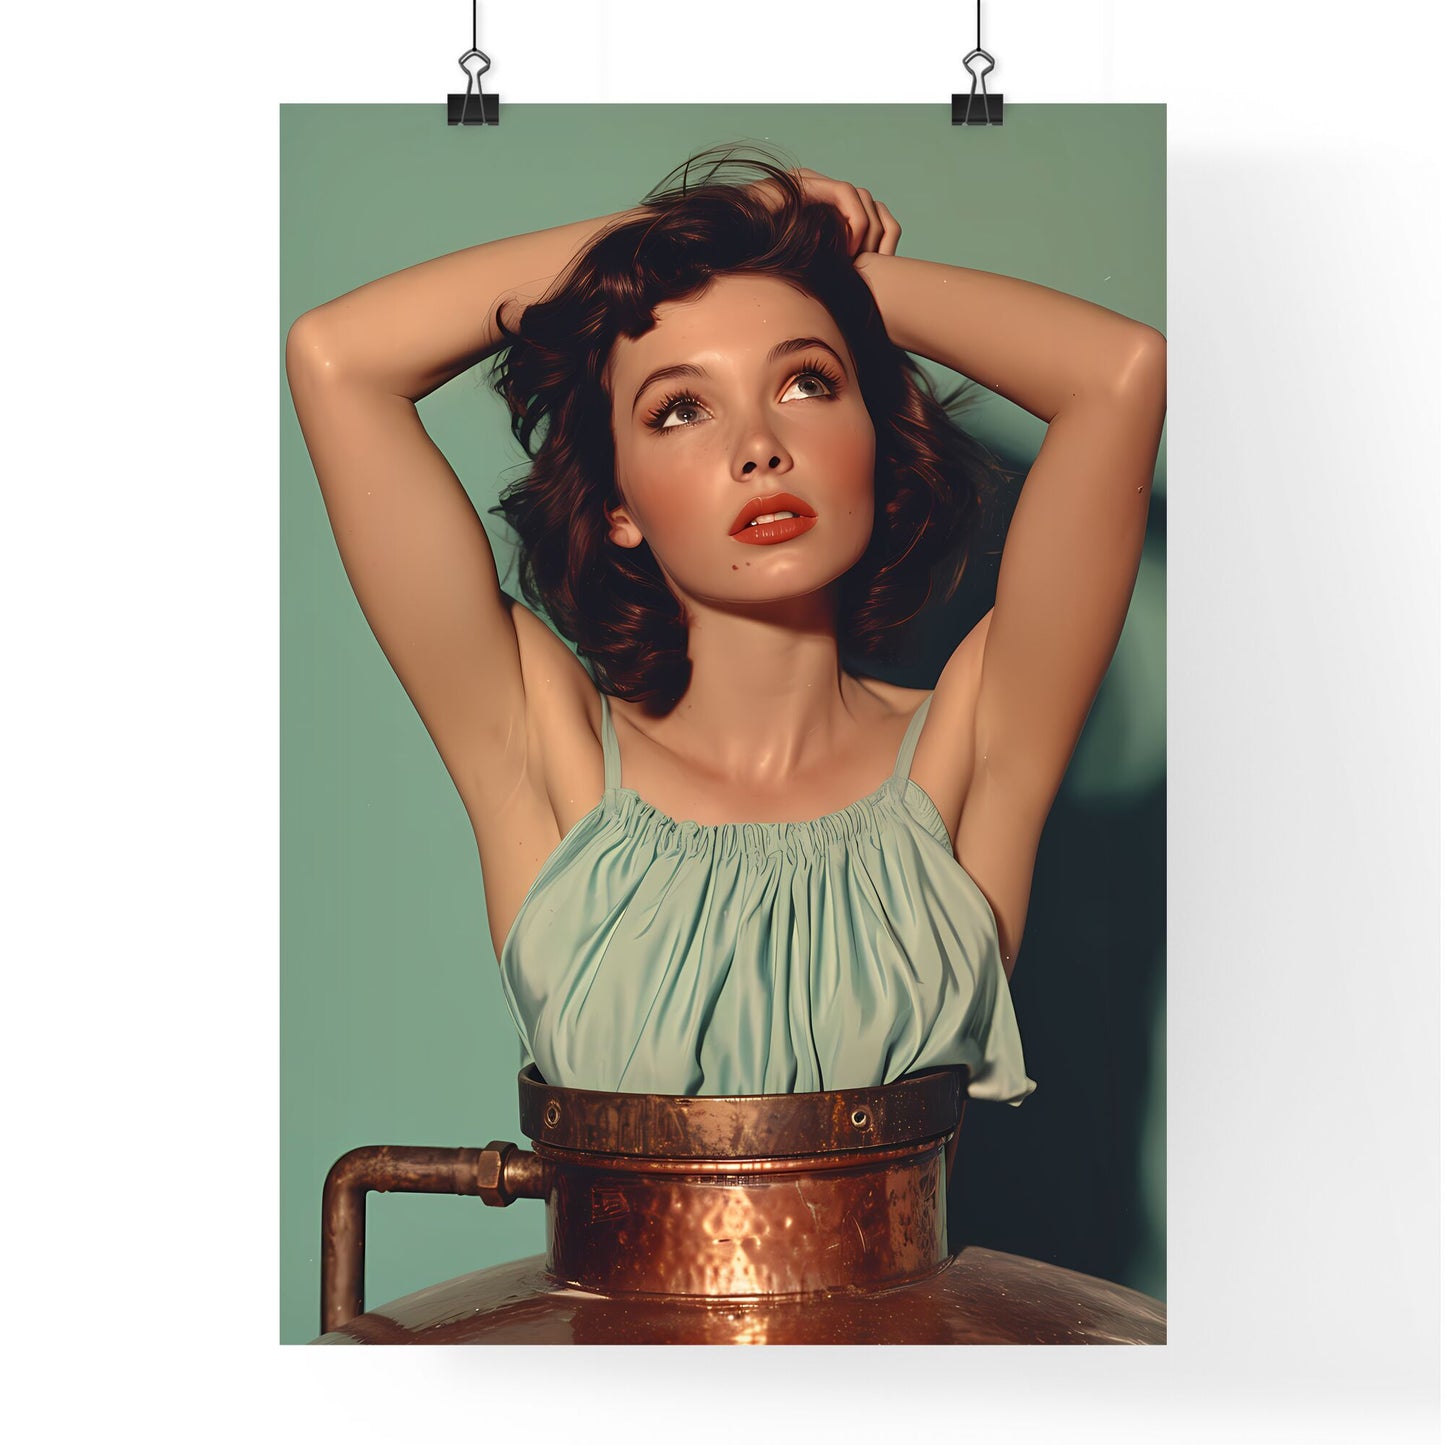 50s pin up girl sitting on top of a copper still wearing a short halter top and denim shorts - Art print of a woman with her arms behind her head Default Title